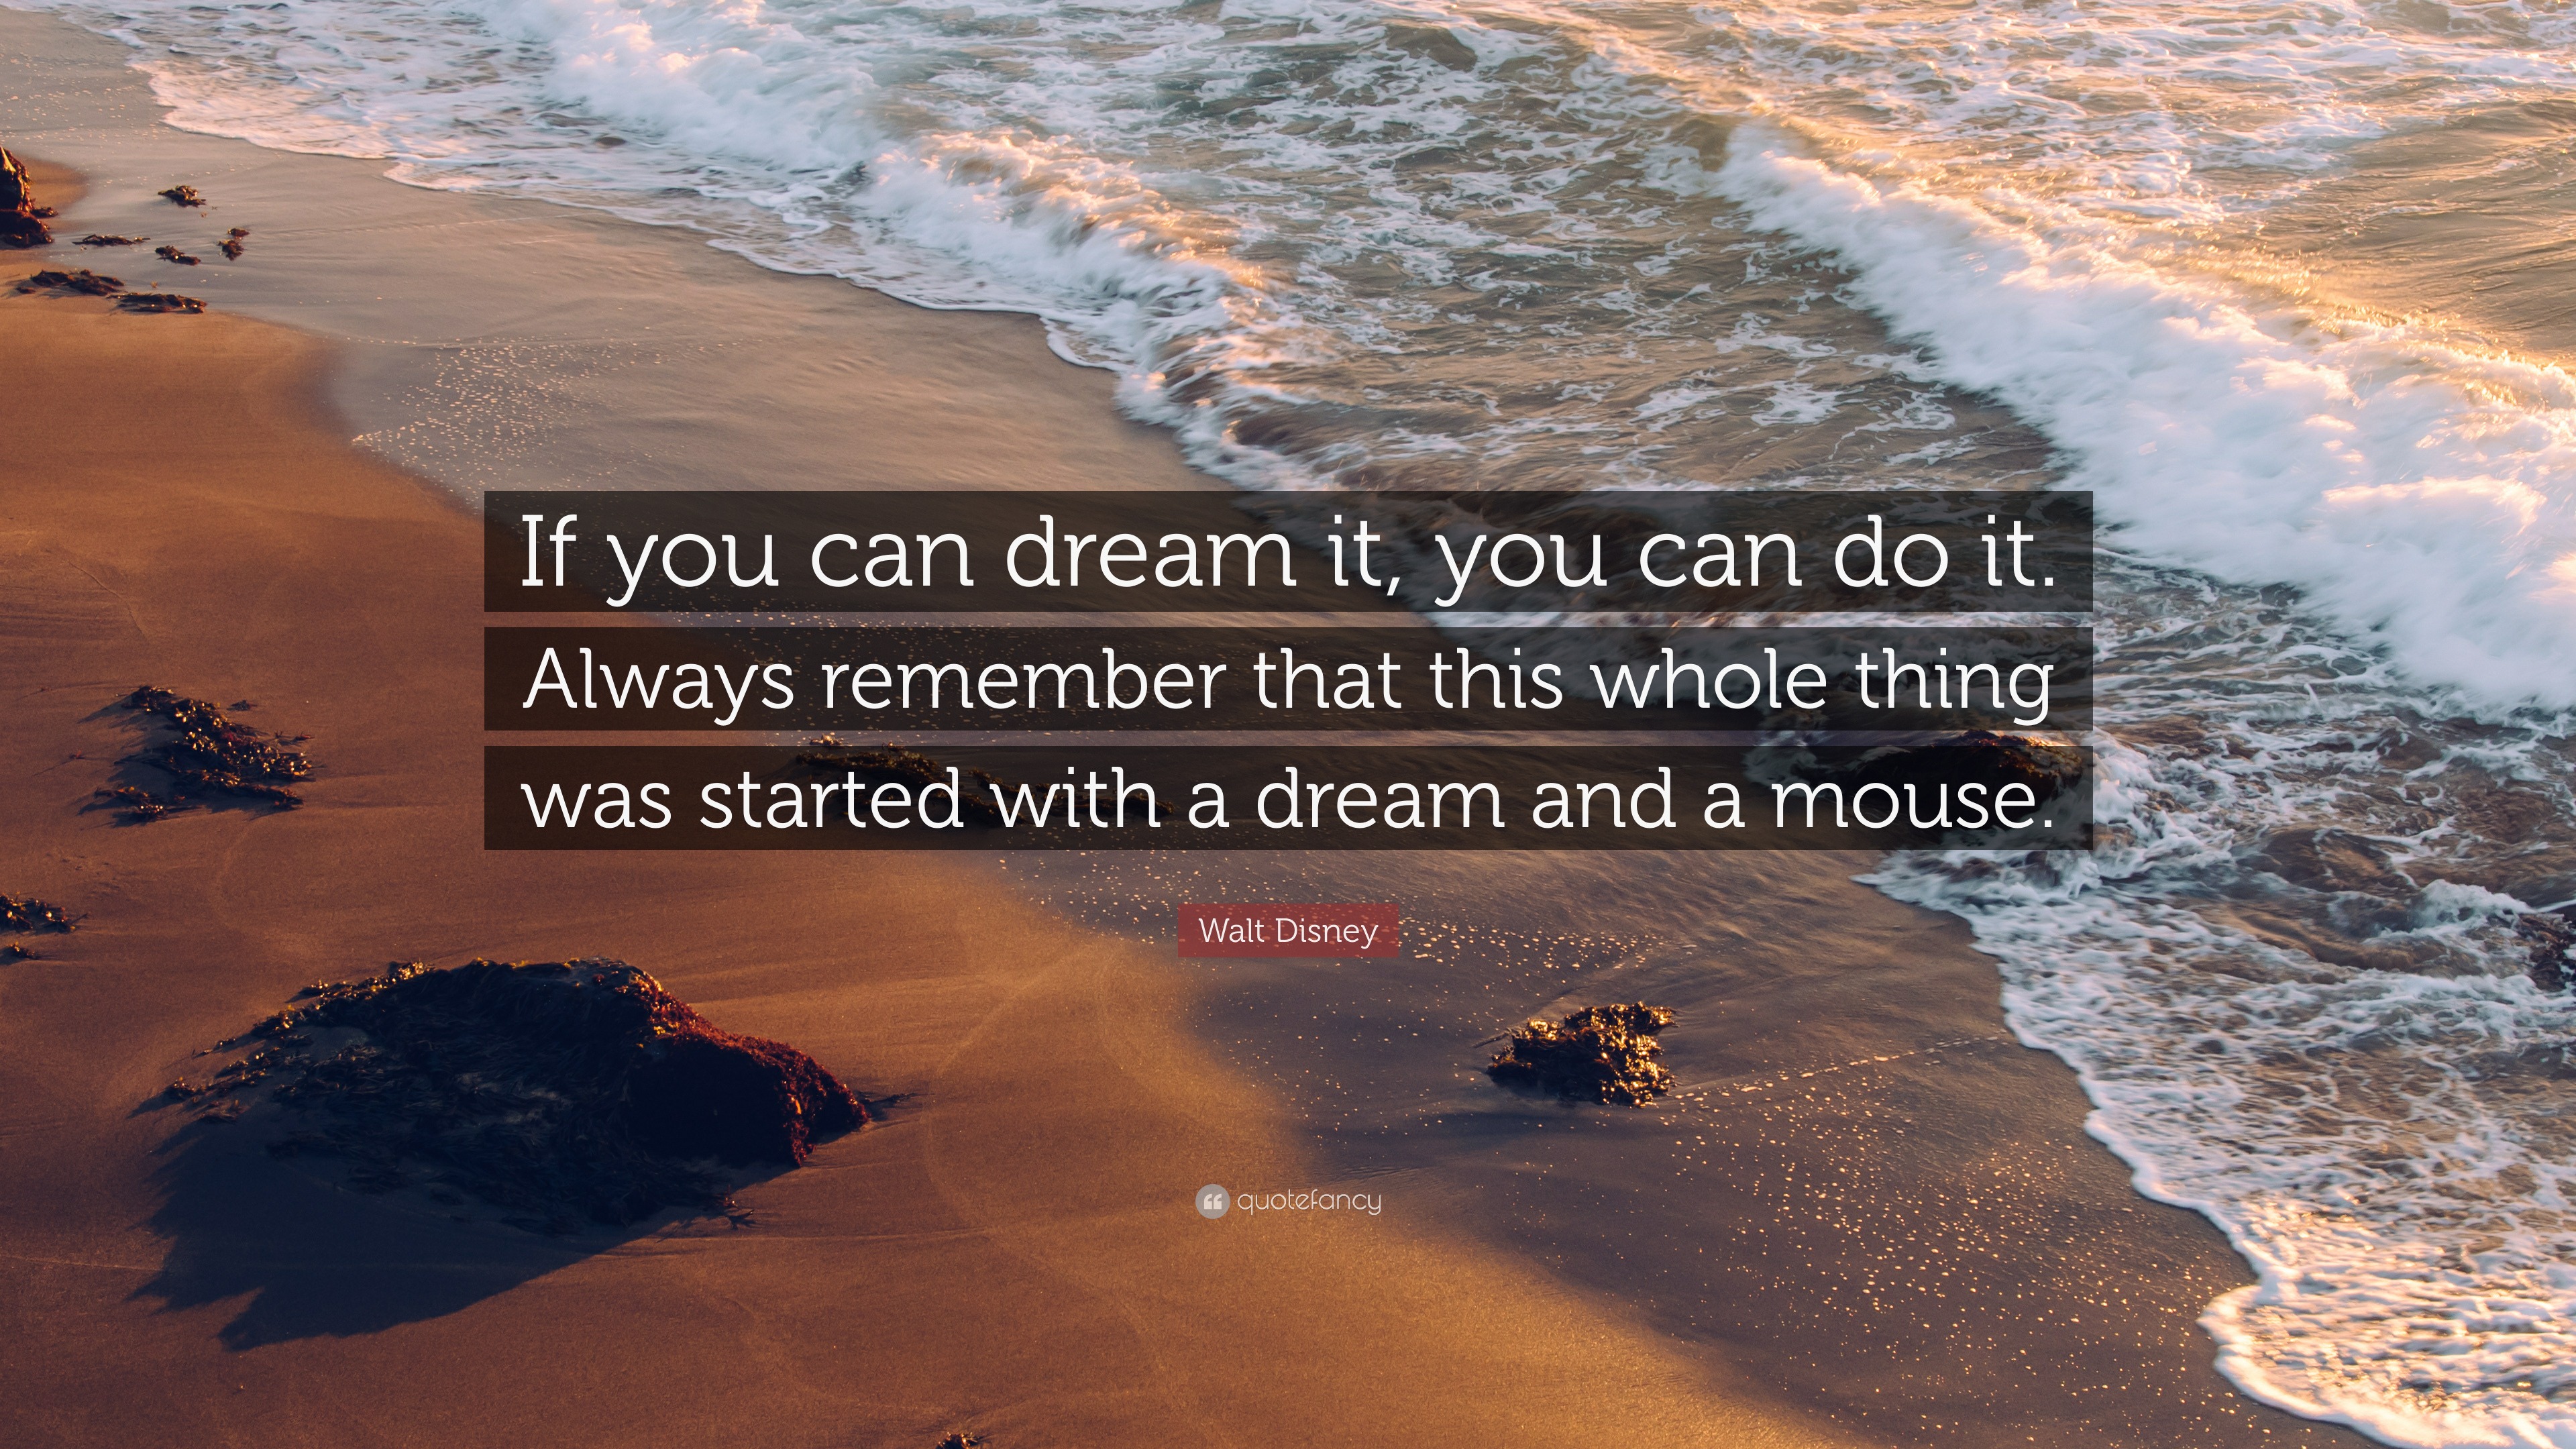 Walt Disney Quote: “If you can dream it, you can do it. Always remember